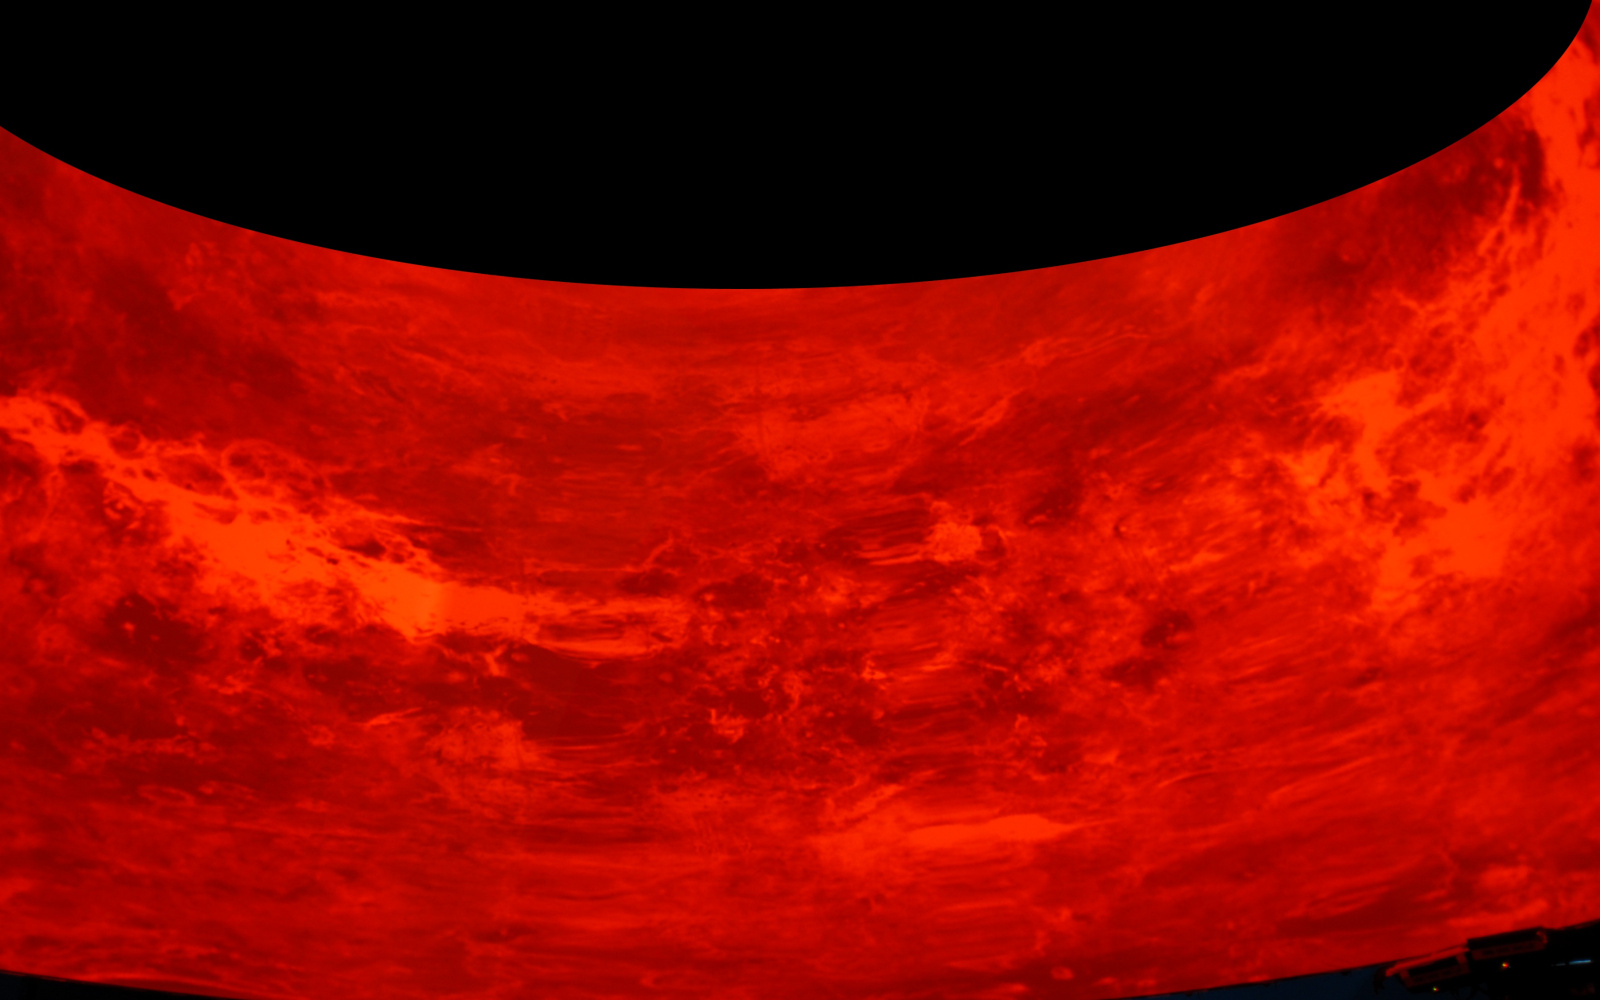 Red 360° degree projection in black space.